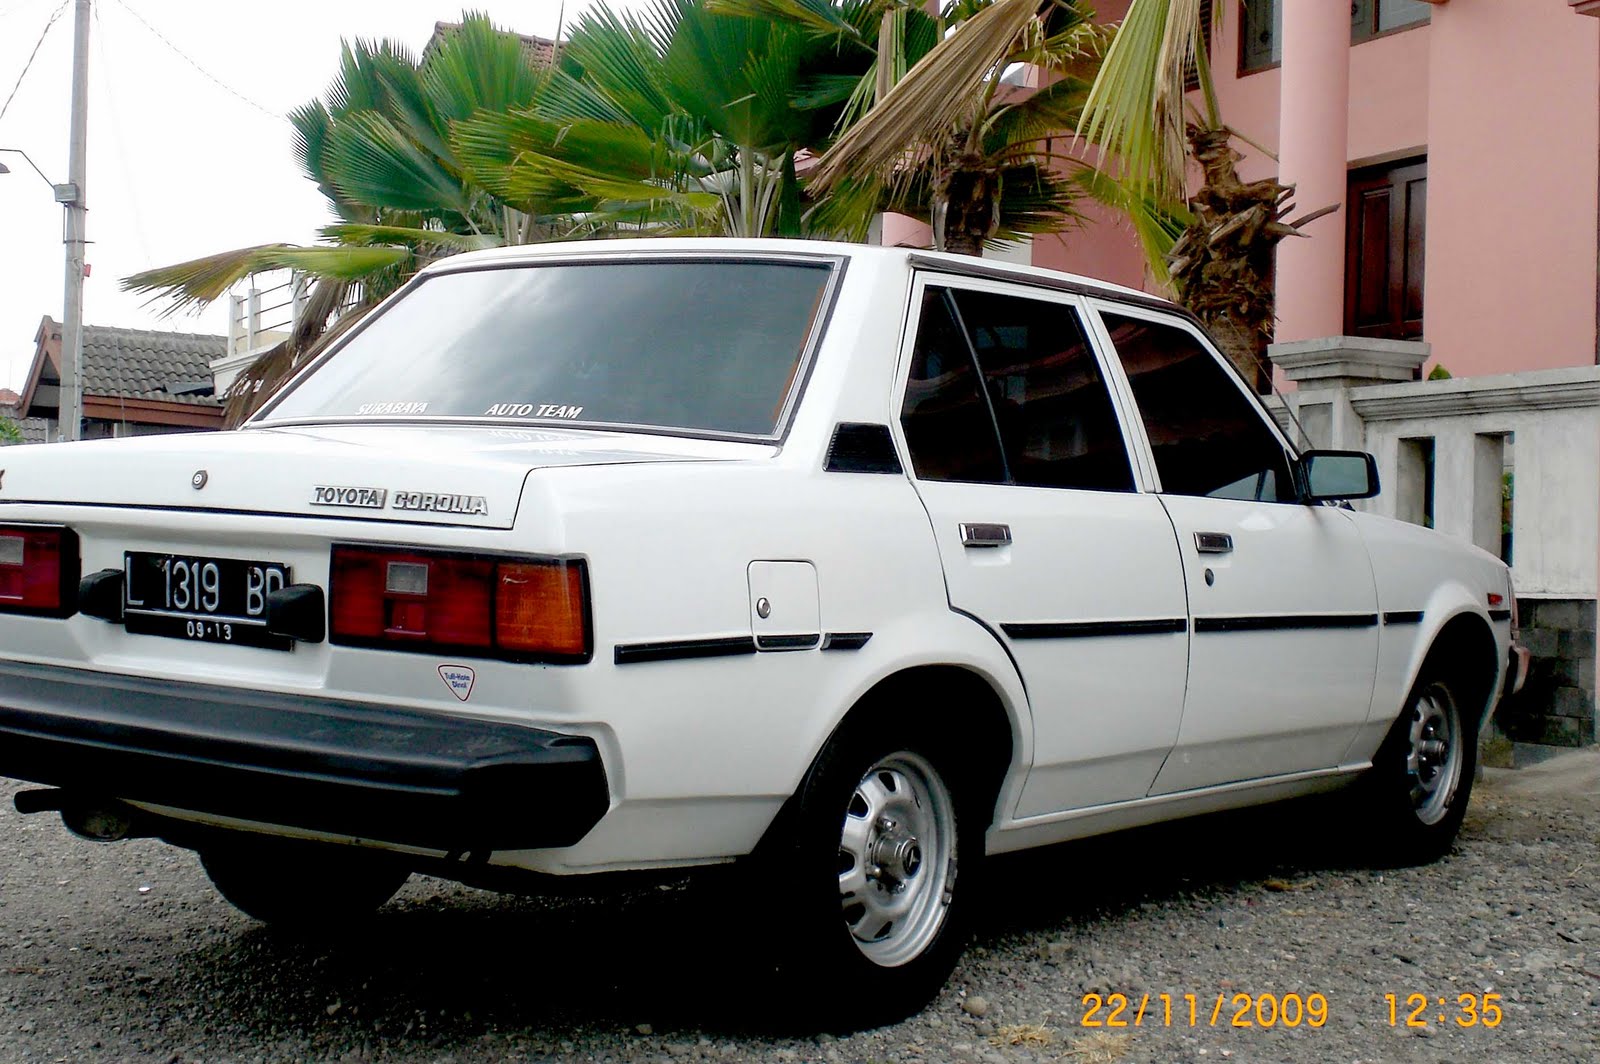 AAS MOTOR Corp Corolla  DX  Thn 83  All Original SOLD OUT 